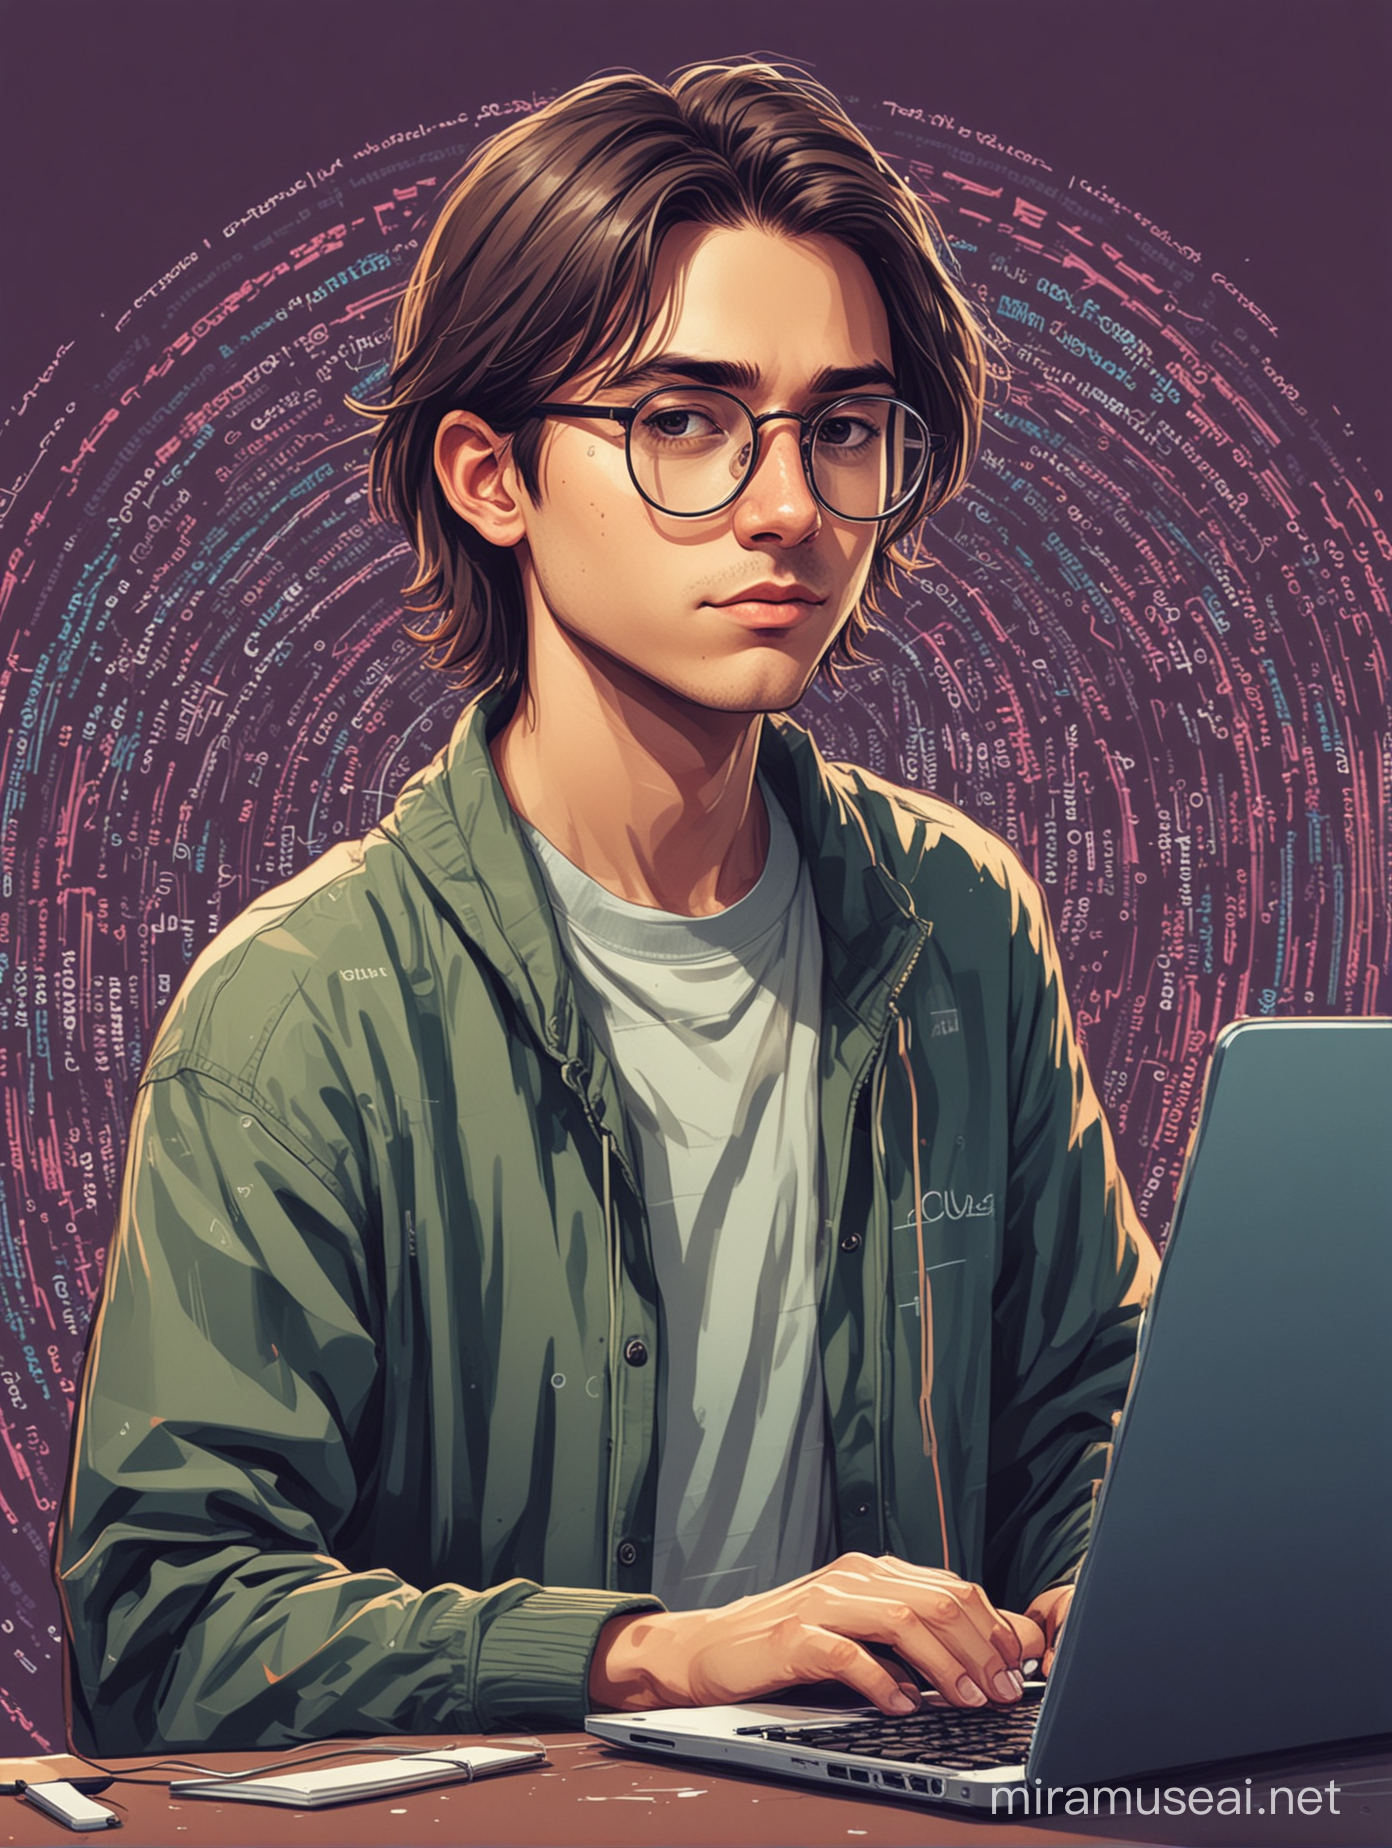 Cartoon Style Ethical Hacker Young Programmer with Circular Glasses and Laptop Surrounded by Code